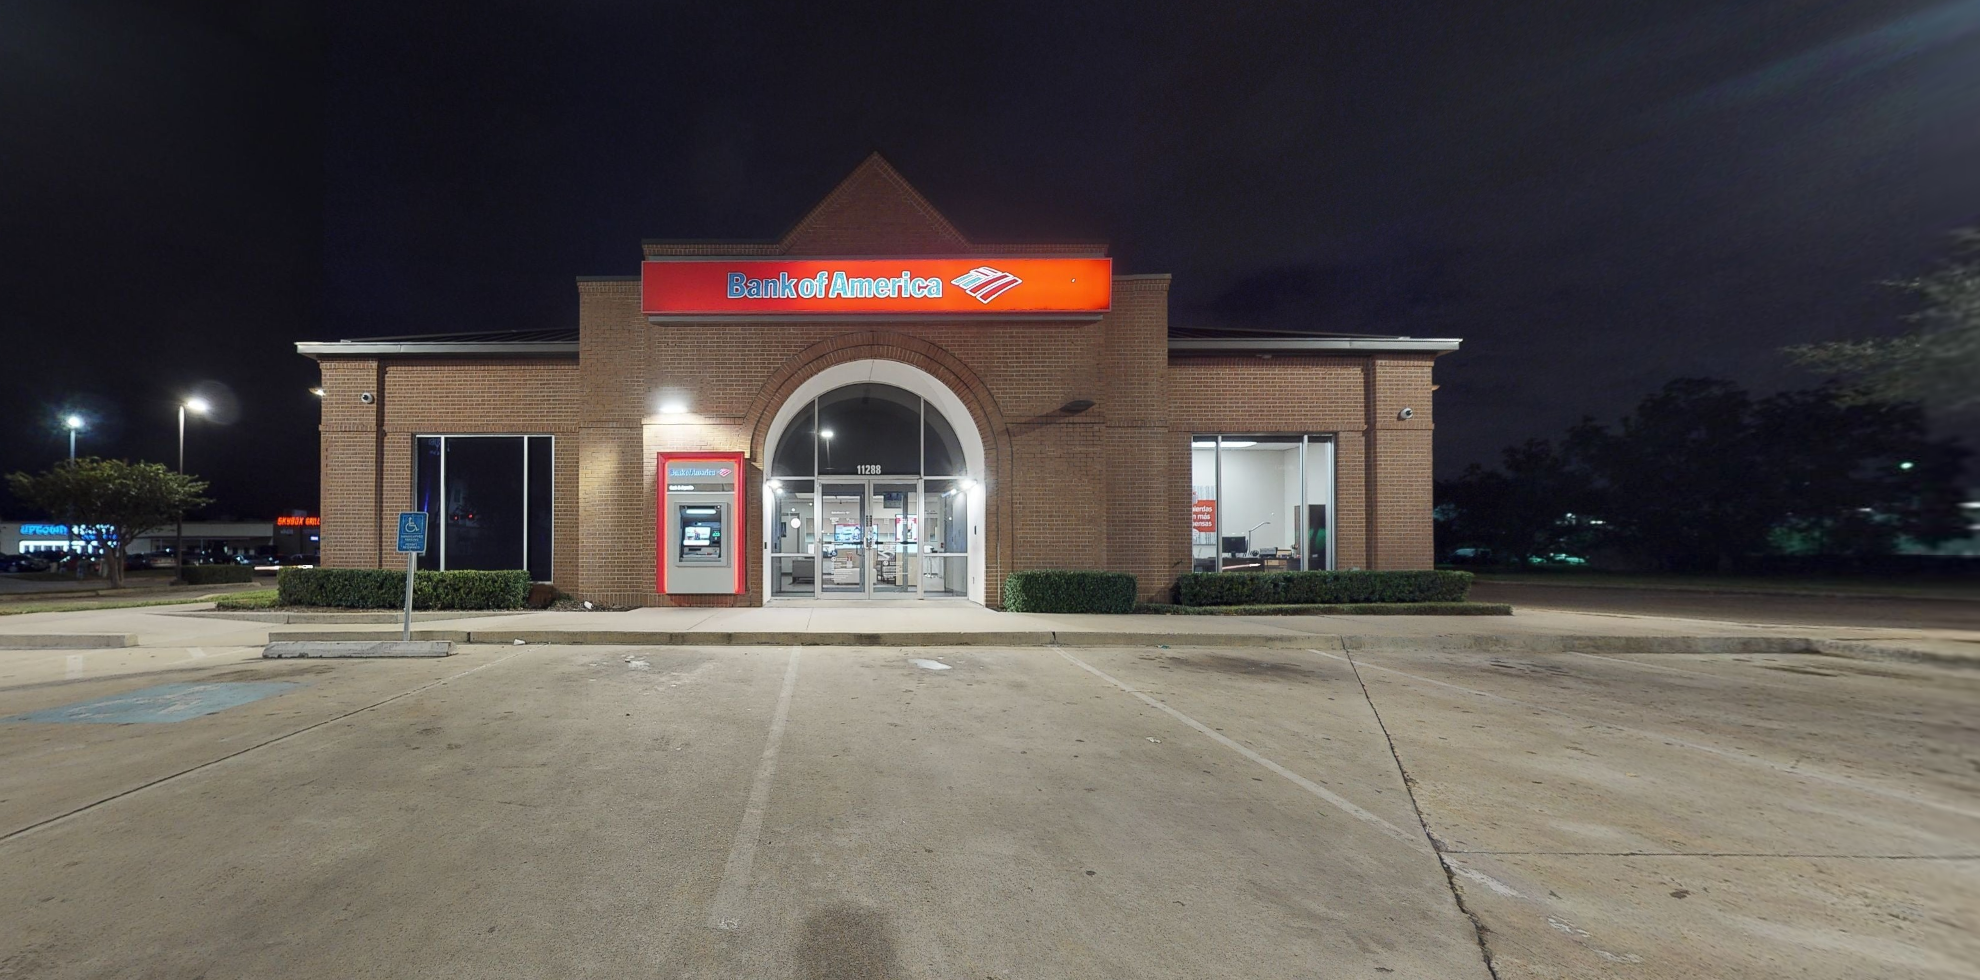 Bank of America financial center with drive-thru ATM | 11288 Westheimer Rd, Houston, TX 77042